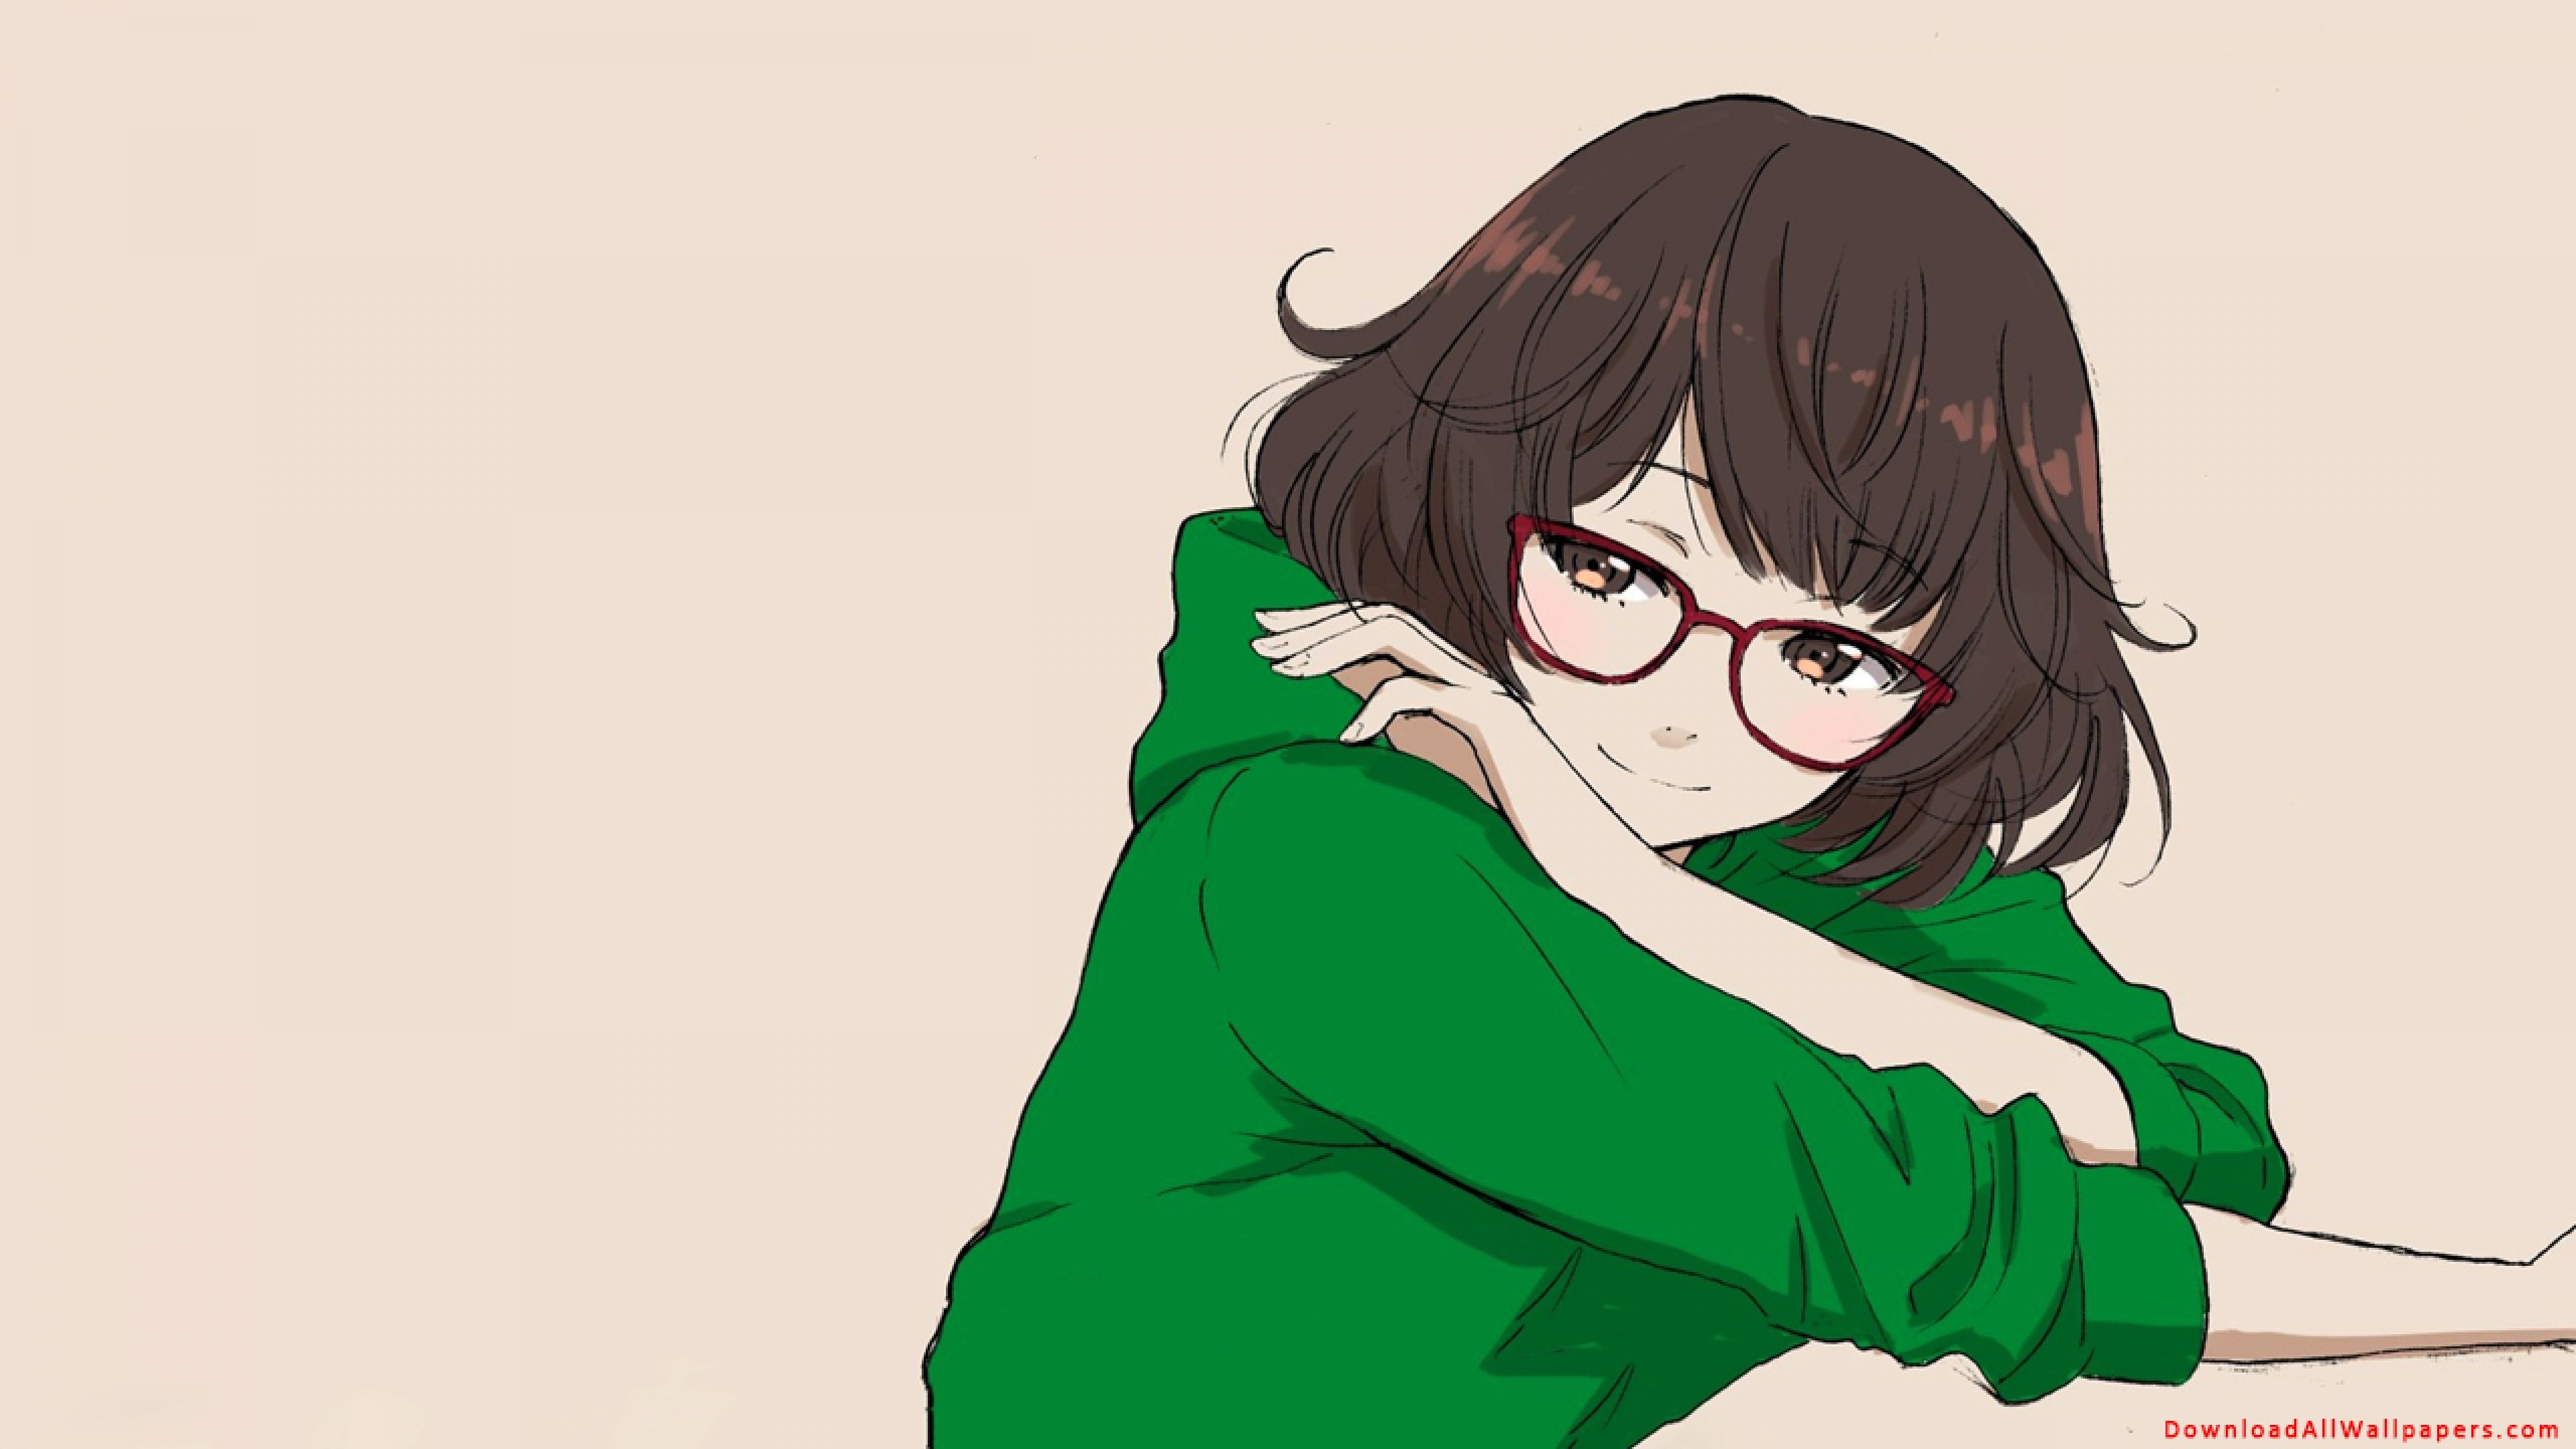 Anime Girl In Green Dress With Spectacles, Anime Girl In Green